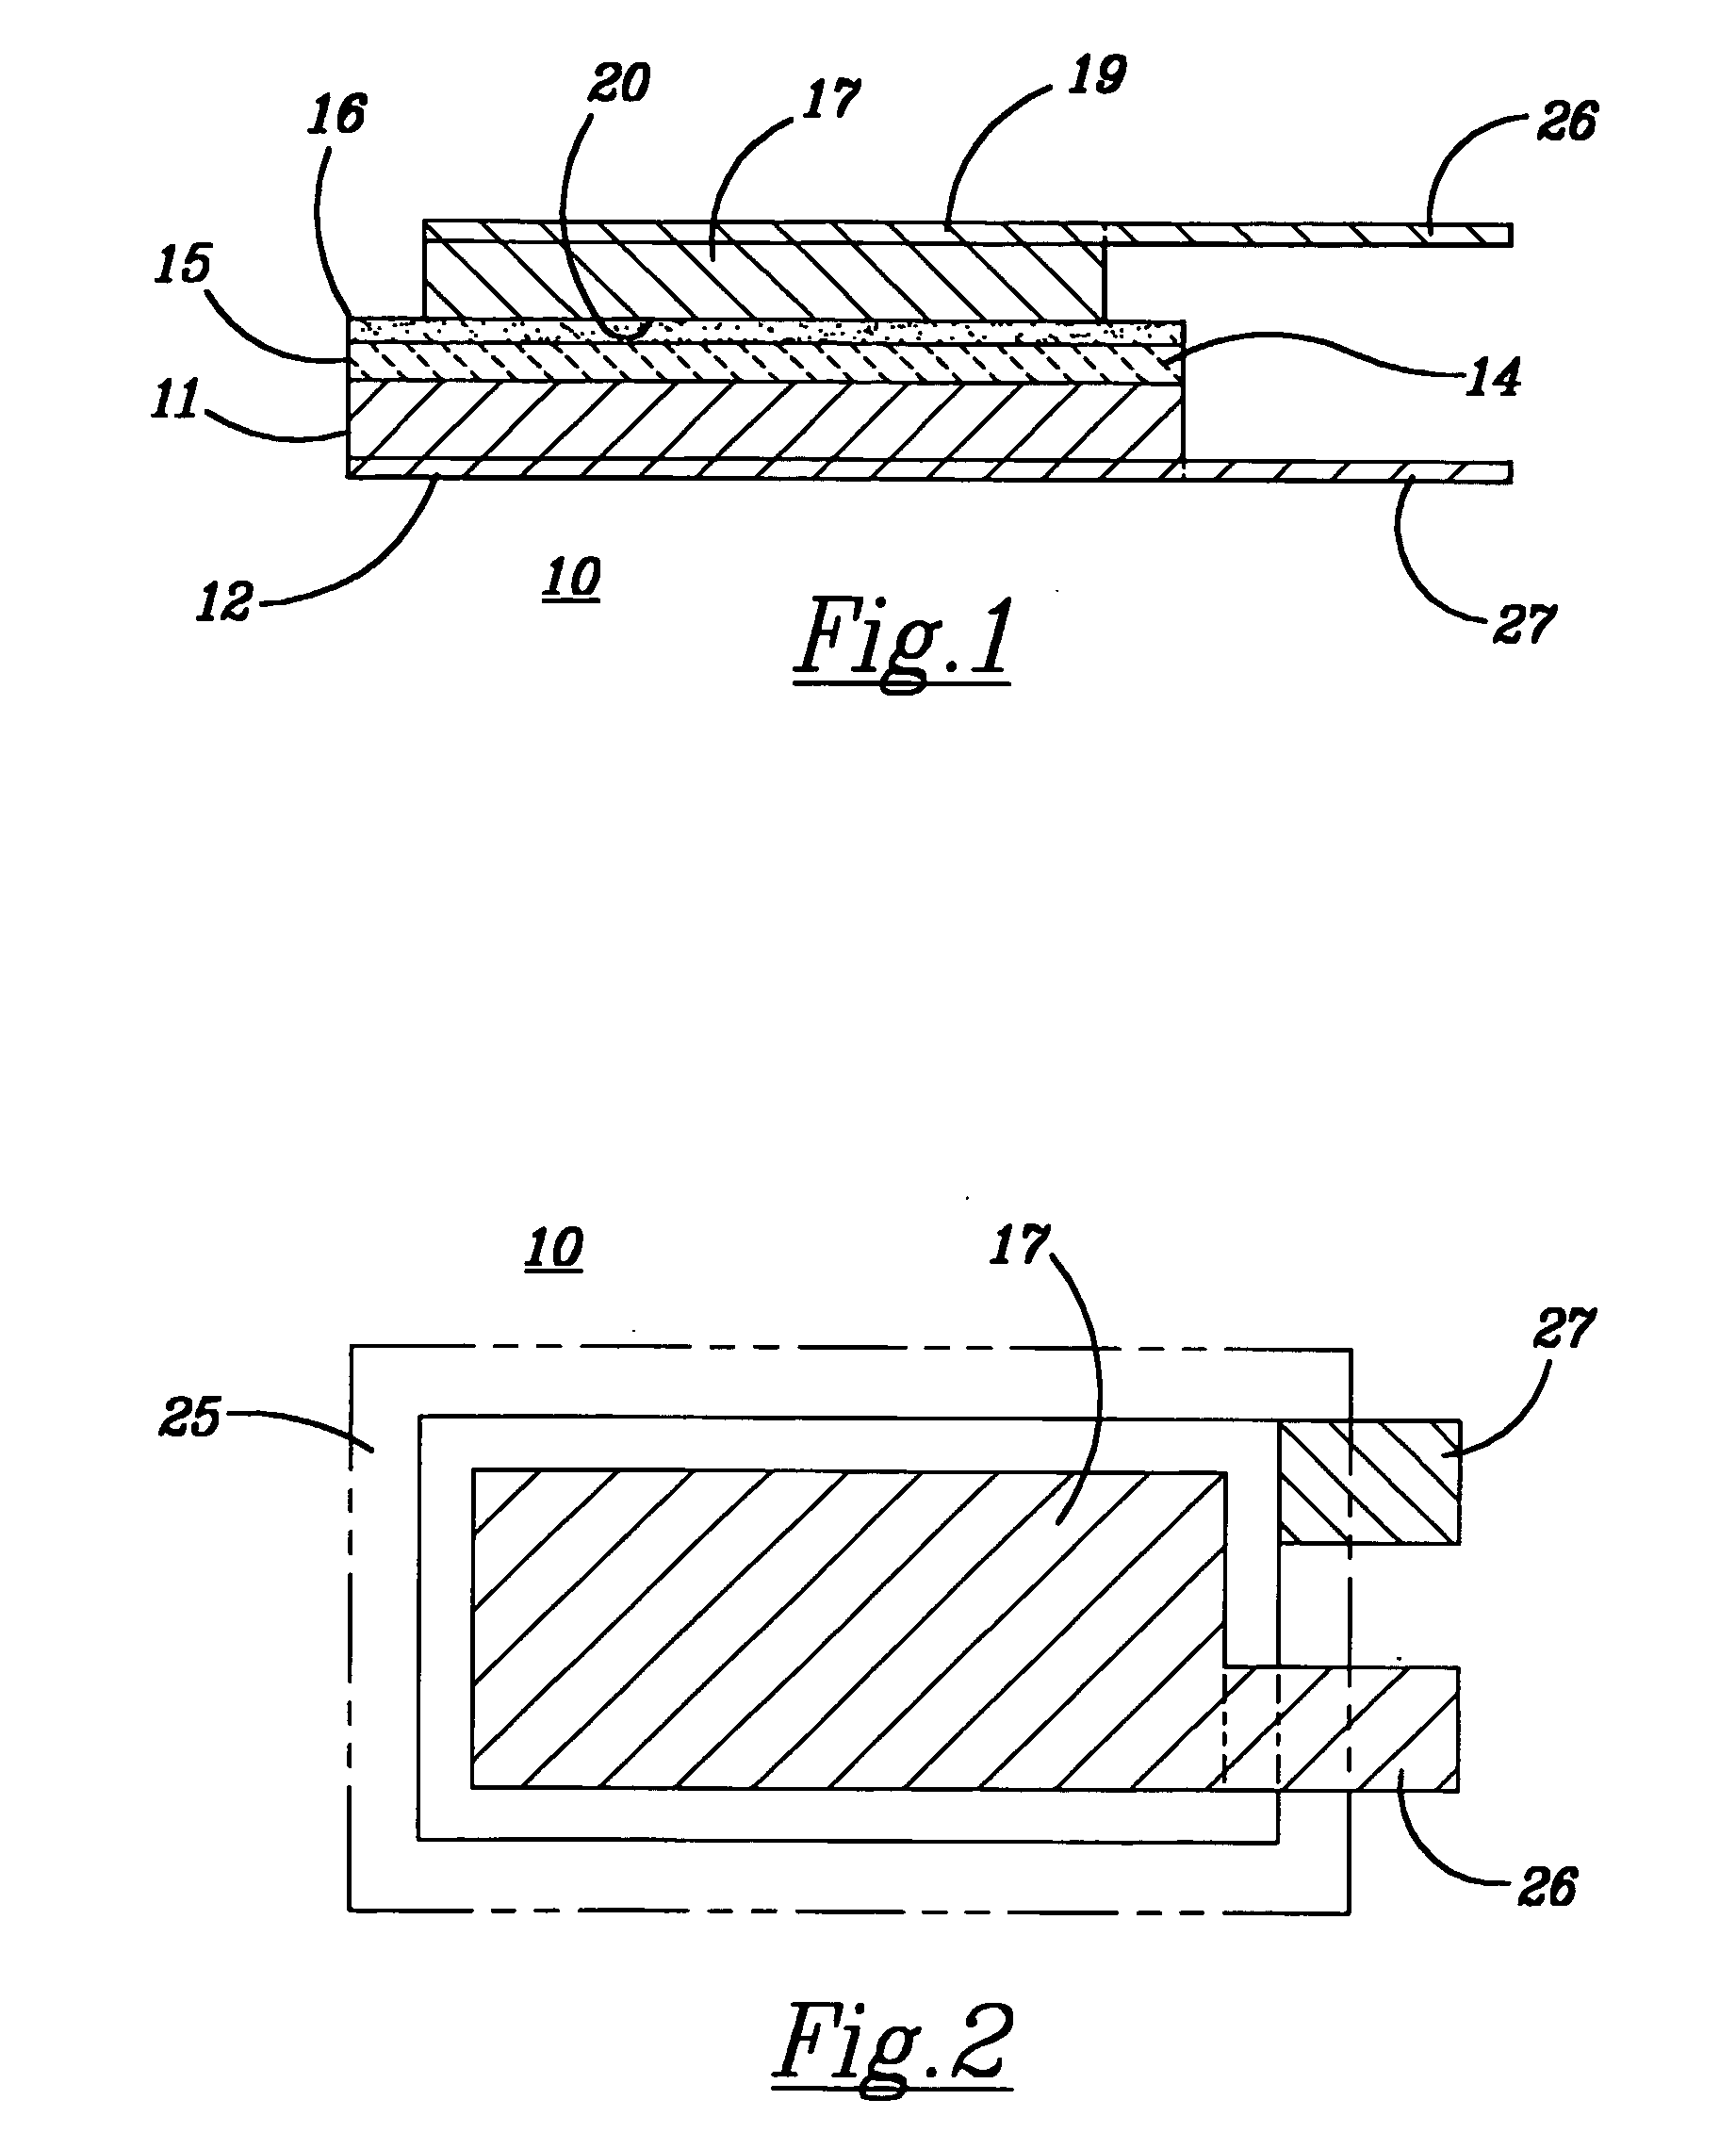 Lithium based electrochemical devices having a ceramic separator glued therein by an ion conductive adhesive